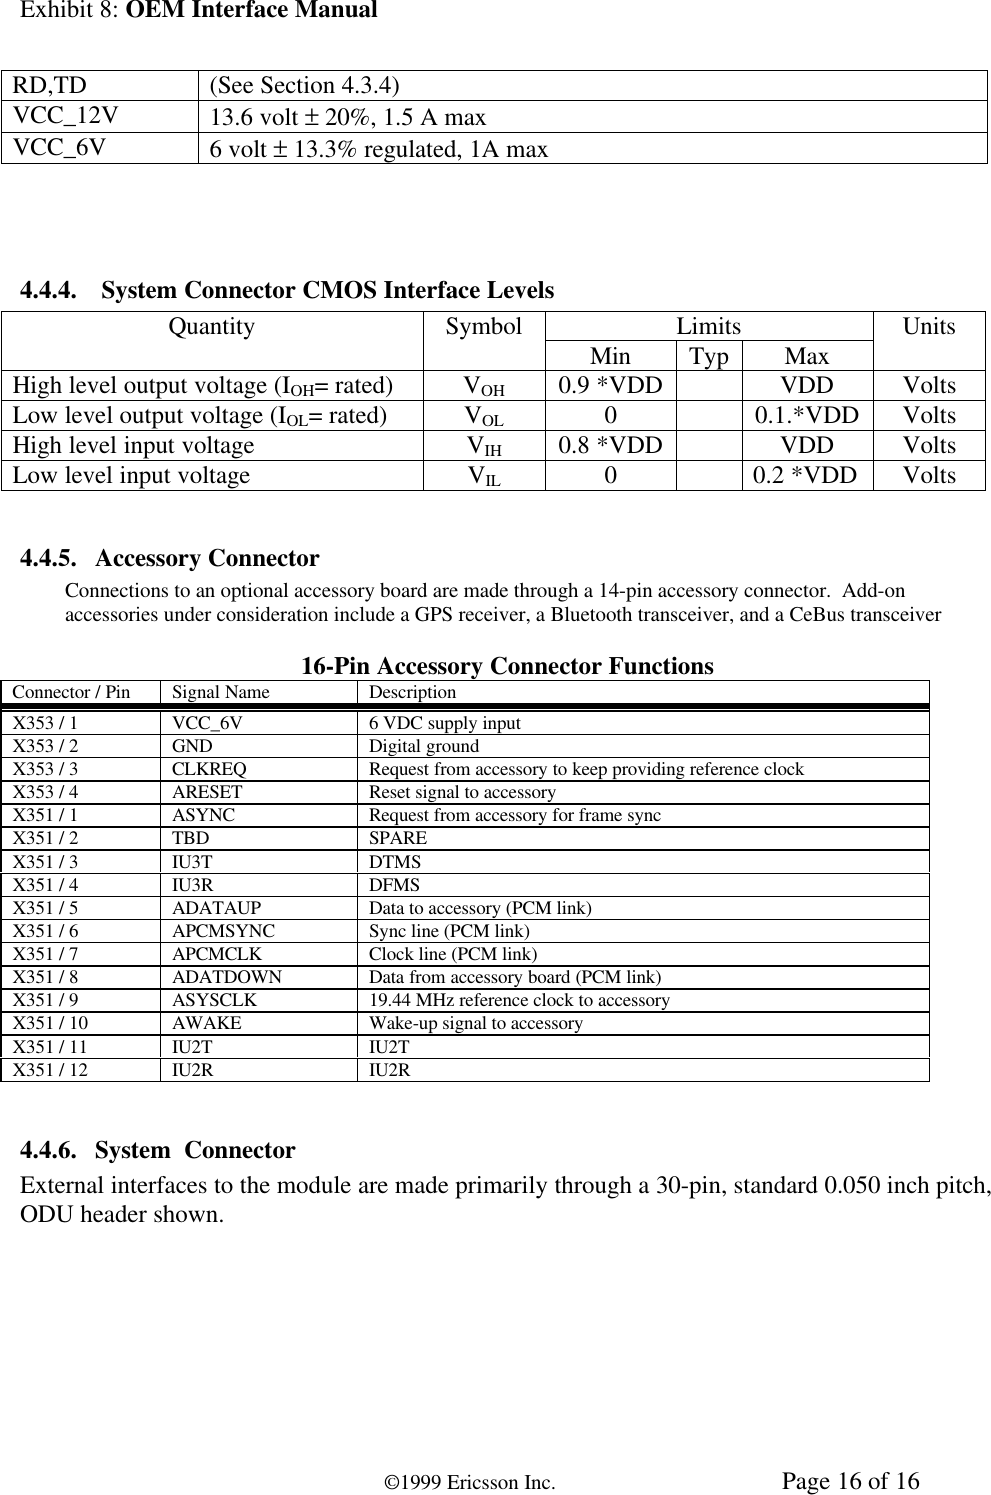 Exhibit 8: OEM Interface Manual©1999 Ericsson Inc. Page 16 of 16RD,TD (See Section 4.3.4)VCC_12V 13.6 volt ± 20%, 1.5 A maxVCC_6V 6 volt ± 13.3% regulated, 1A max4.4.4.  System Connector CMOS Interface LevelsLimitsQuantity Symbol Min Typ Max UnitsHigh level output voltage (IOH= rated) VOH 0.9 *VDD VDD VoltsLow level output voltage (IOL= rated) VOL 00.1.*VDD VoltsHigh level input voltage VIH 0.8 *VDD VDD VoltsLow level input voltage VIL 00.2 *VDD Volts4.4.5. Accessory ConnectorConnections to an optional accessory board are made through a 14-pin accessory connector.  Add-onaccessories under consideration include a GPS receiver, a Bluetooth transceiver, and a CeBus transceiver16-Pin Accessory Connector FunctionsConnector / Pin Signal Name DescriptionX353 / 1 VCC_6V 6 VDC supply inputX353 / 2 GND Digital groundX353 / 3 CLKREQ Request from accessory to keep providing reference clockX353 / 4 ARESET Reset signal to accessoryX351 / 1 ASYNC Request from accessory for frame syncX351 / 2 TBD SPAREX351 / 3 IU3T DTMSX351 / 4 IU3R DFMSX351 / 5 ADATAUP Data to accessory (PCM link)X351 / 6 APCMSYNC Sync line (PCM link)X351 / 7 APCMCLK Clock line (PCM link)X351 / 8 ADATDOWN Data from accessory board (PCM link)X351 / 9 ASYSCLK 19.44 MHz reference clock to accessoryX351 / 10 AWAKE Wake-up signal to accessoryX351 / 11 IU2T IU2TX351 / 12 IU2R IU2R4.4.6. System  ConnectorExternal interfaces to the module are made primarily through a 30-pin, standard 0.050 inch pitch,ODU header shown.